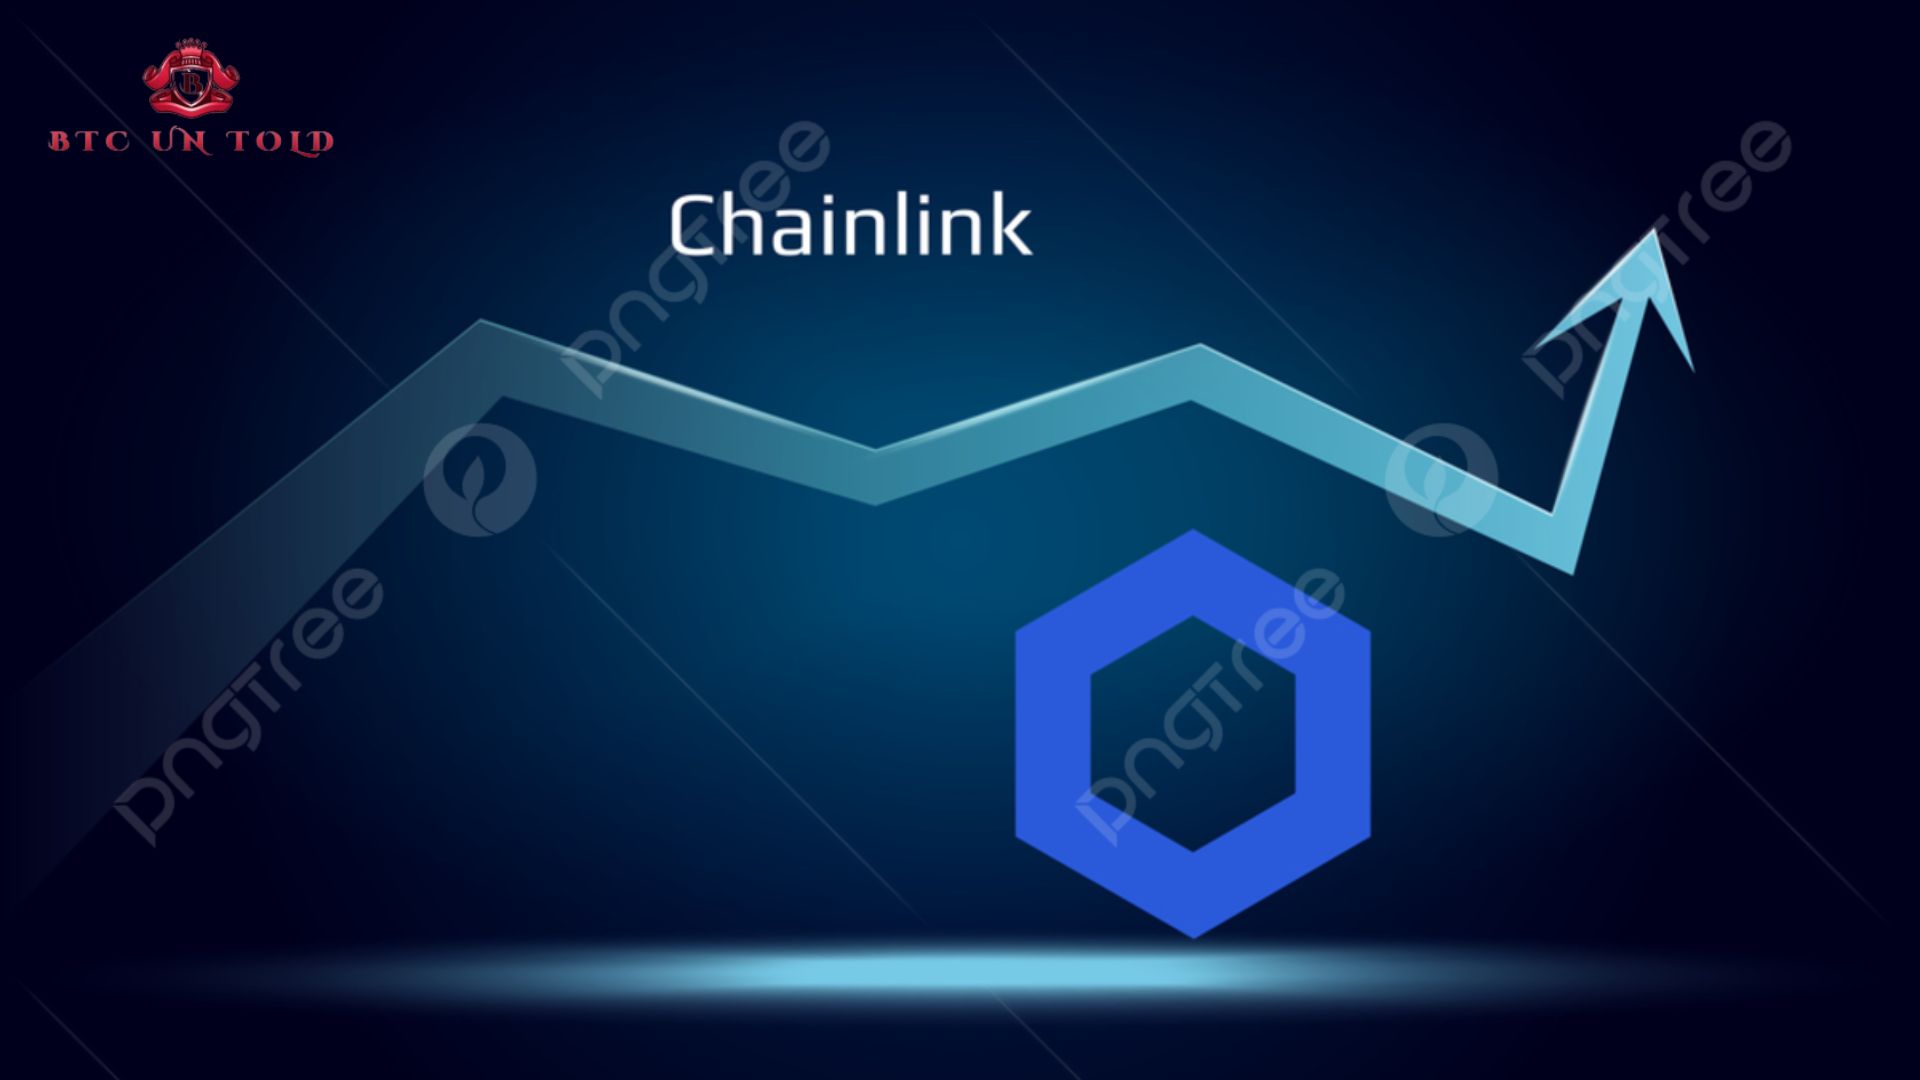 Chainlink Prepares for a Major Breakout